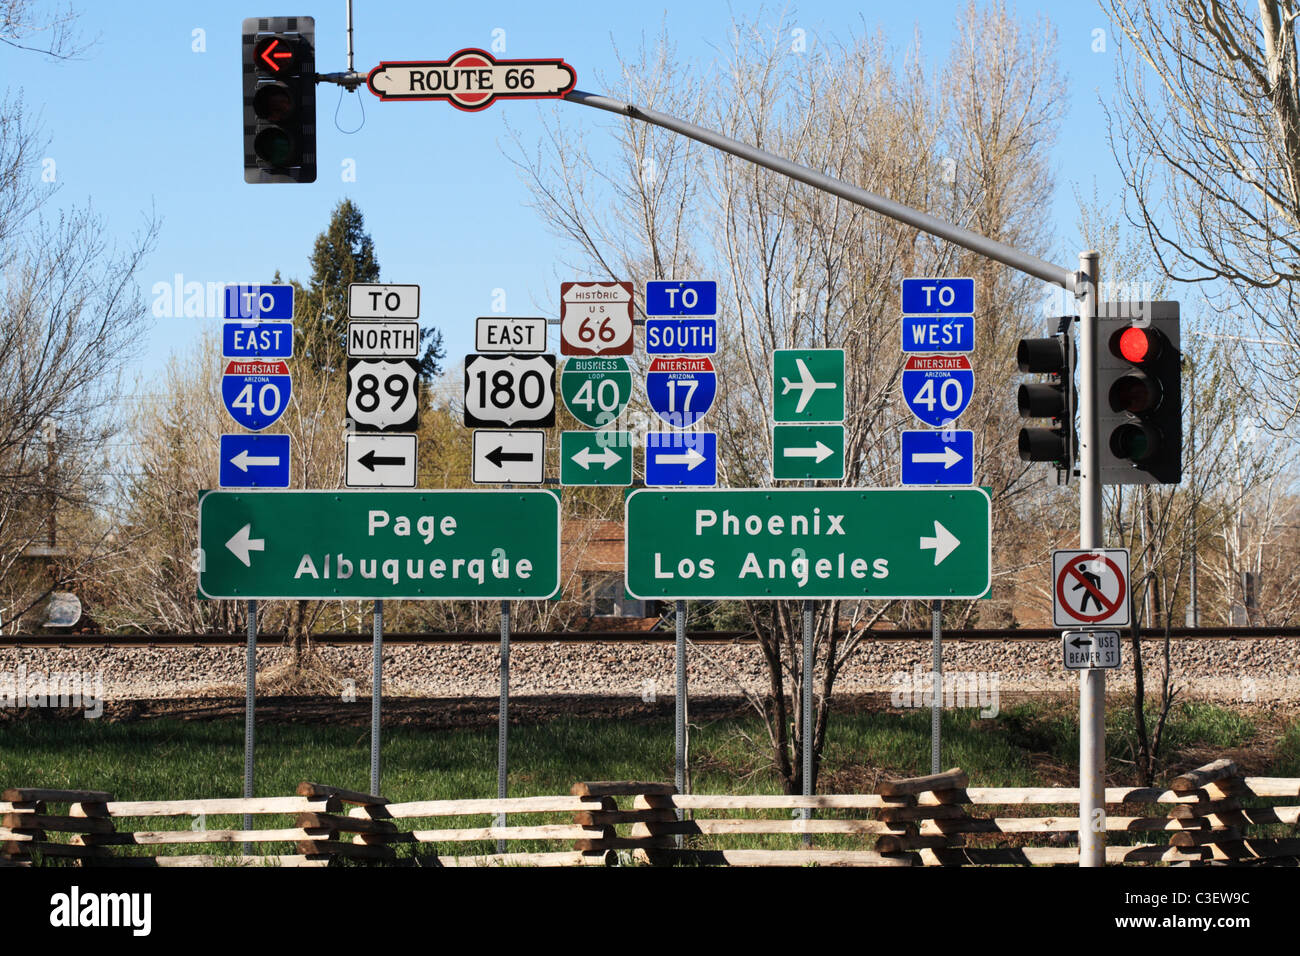 route 66 intersection signs in Flagstaff Arizona Stock Photo